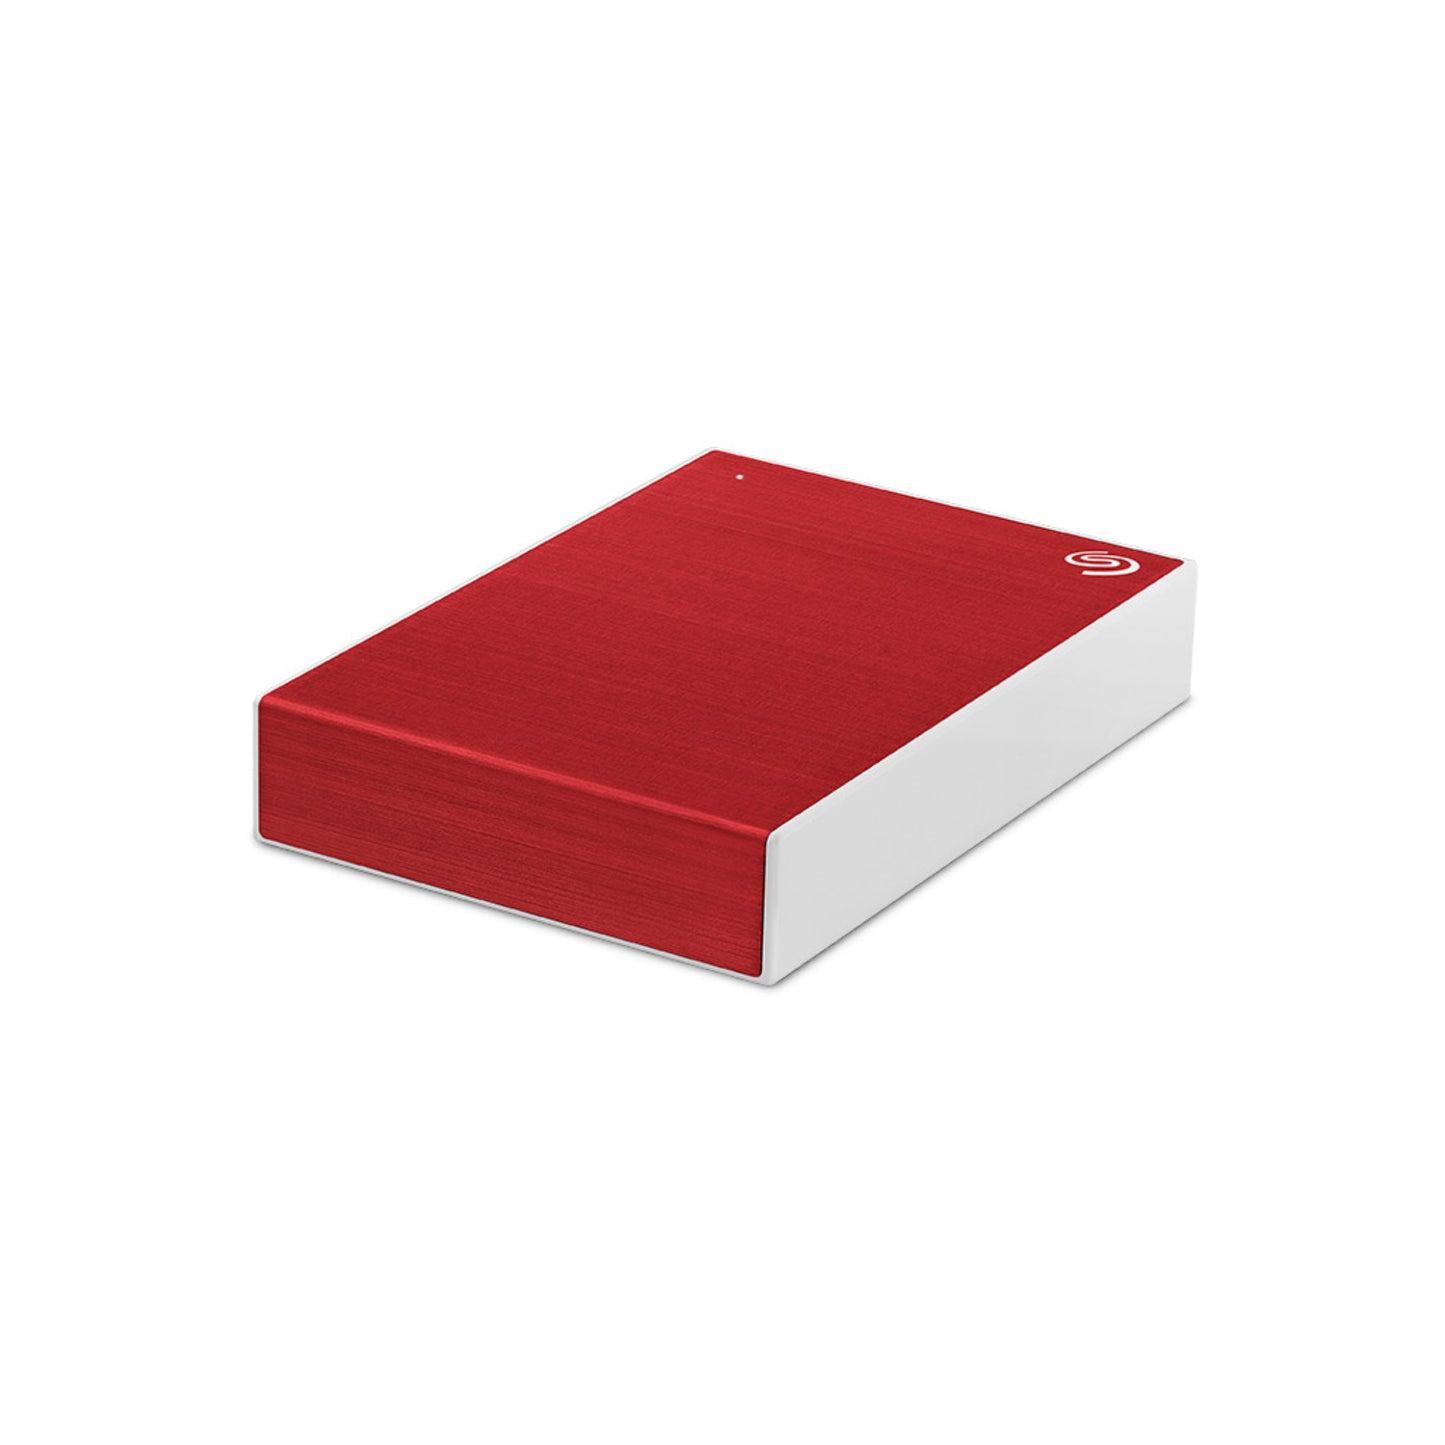 SEAGATE One Touch Slim USB 3.0 2TB - Red